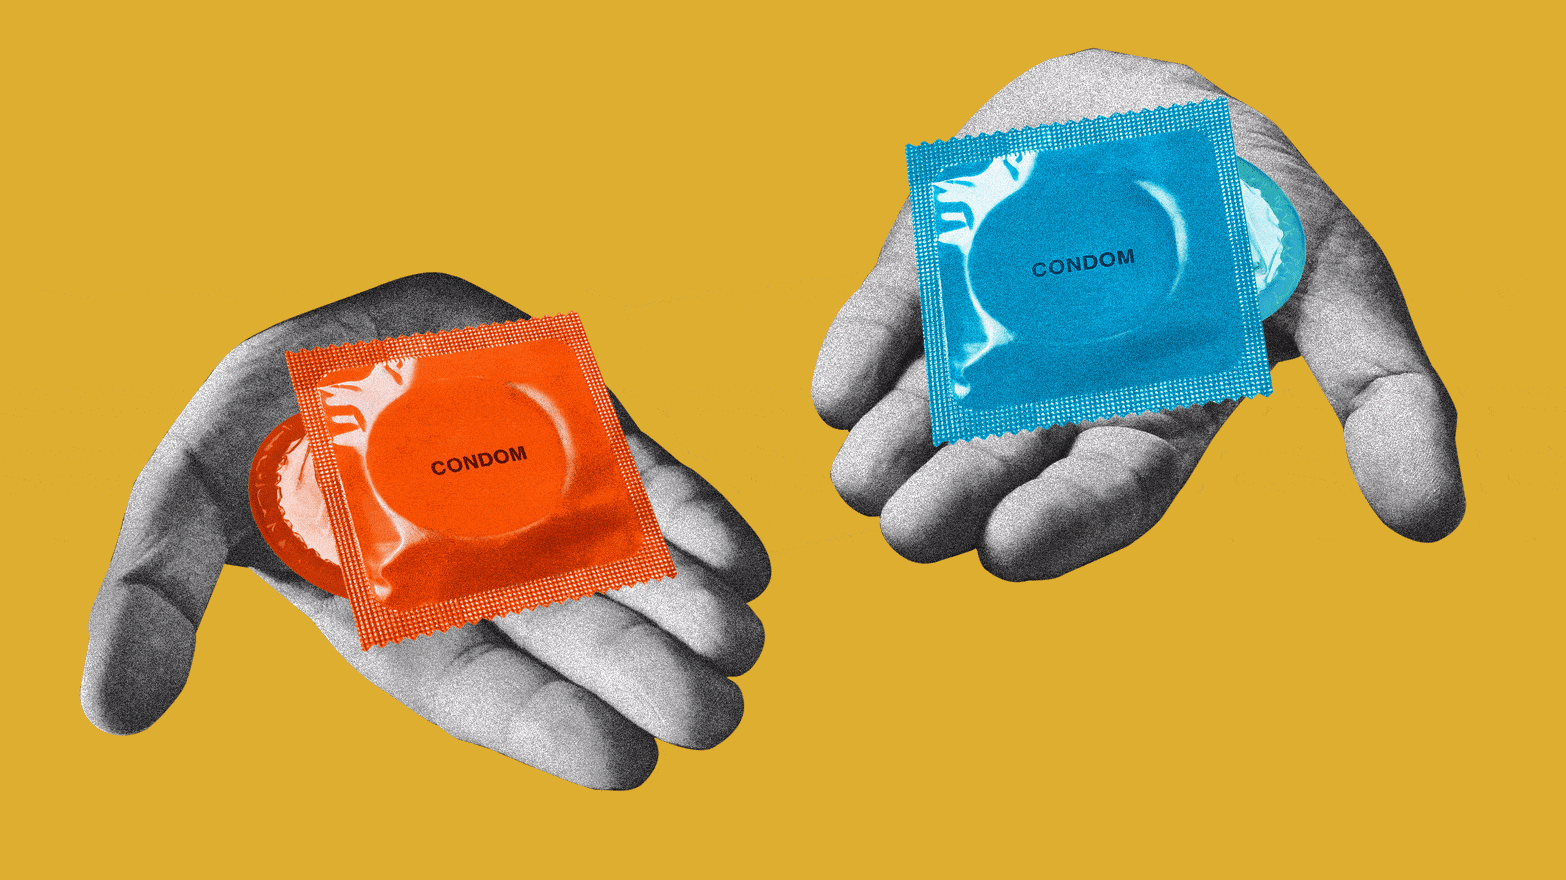 How Can You Tell Which Condom Works Better?